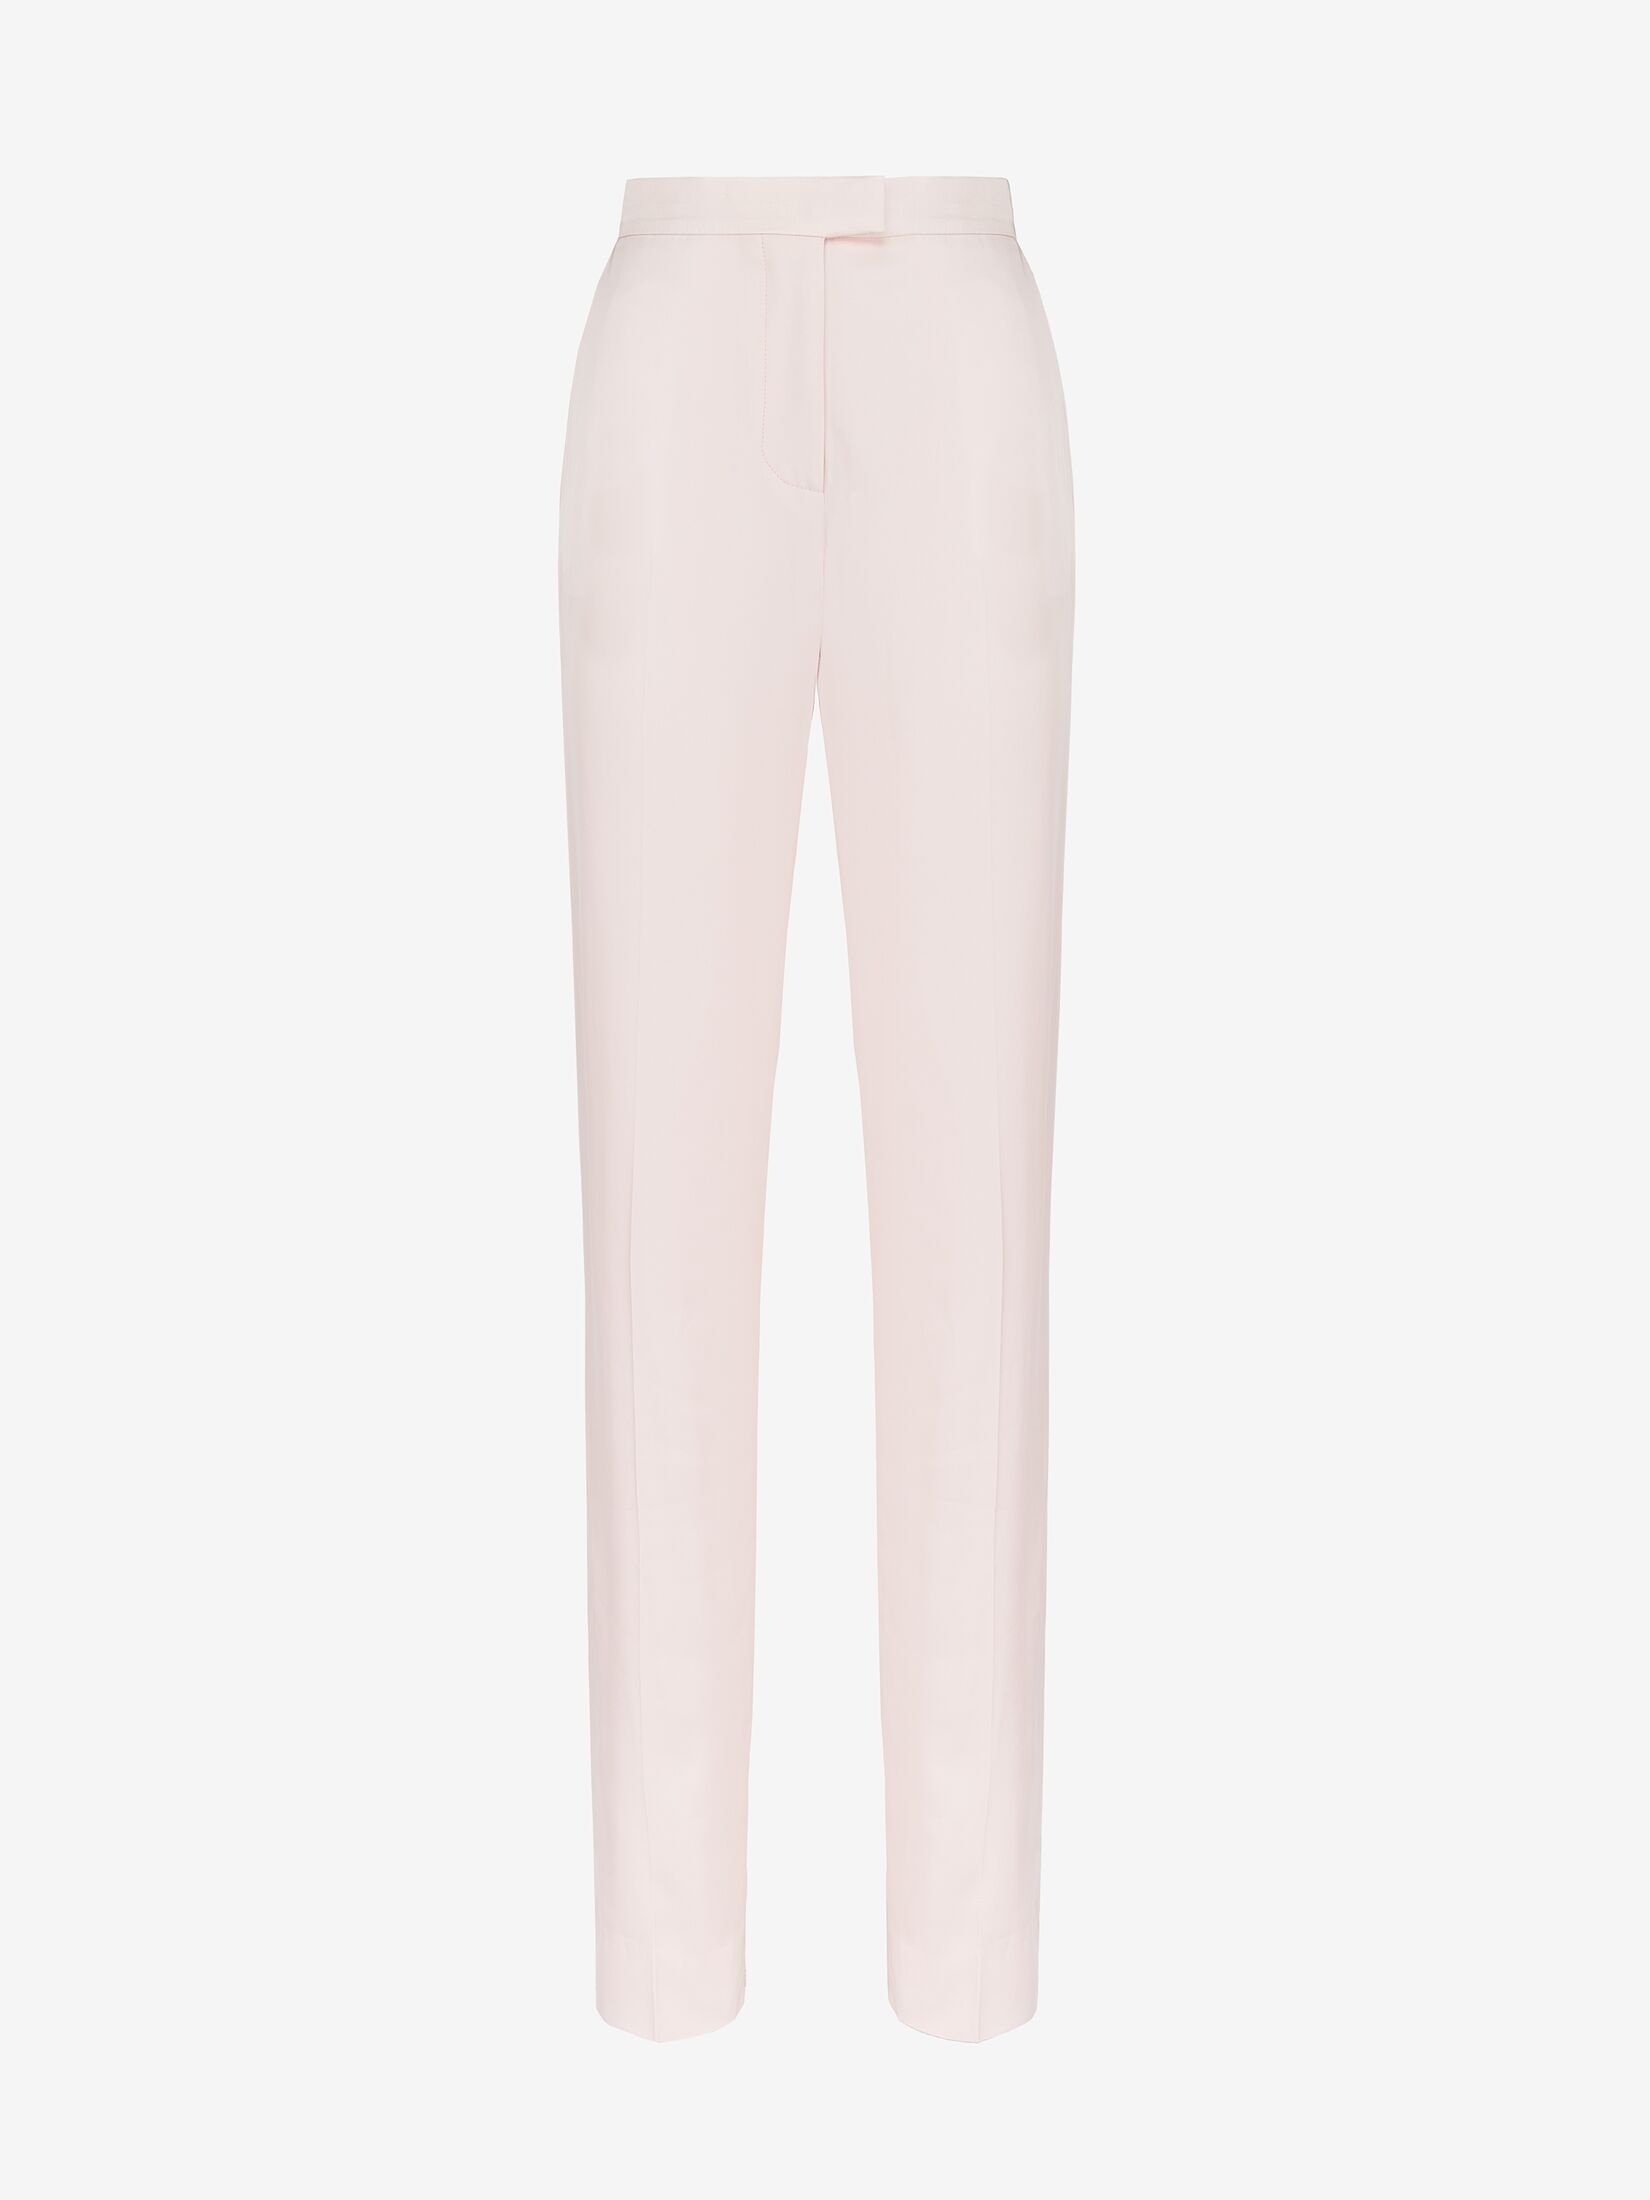 Women's High-waisted Cigarette Trousers in Venus Pink - 1